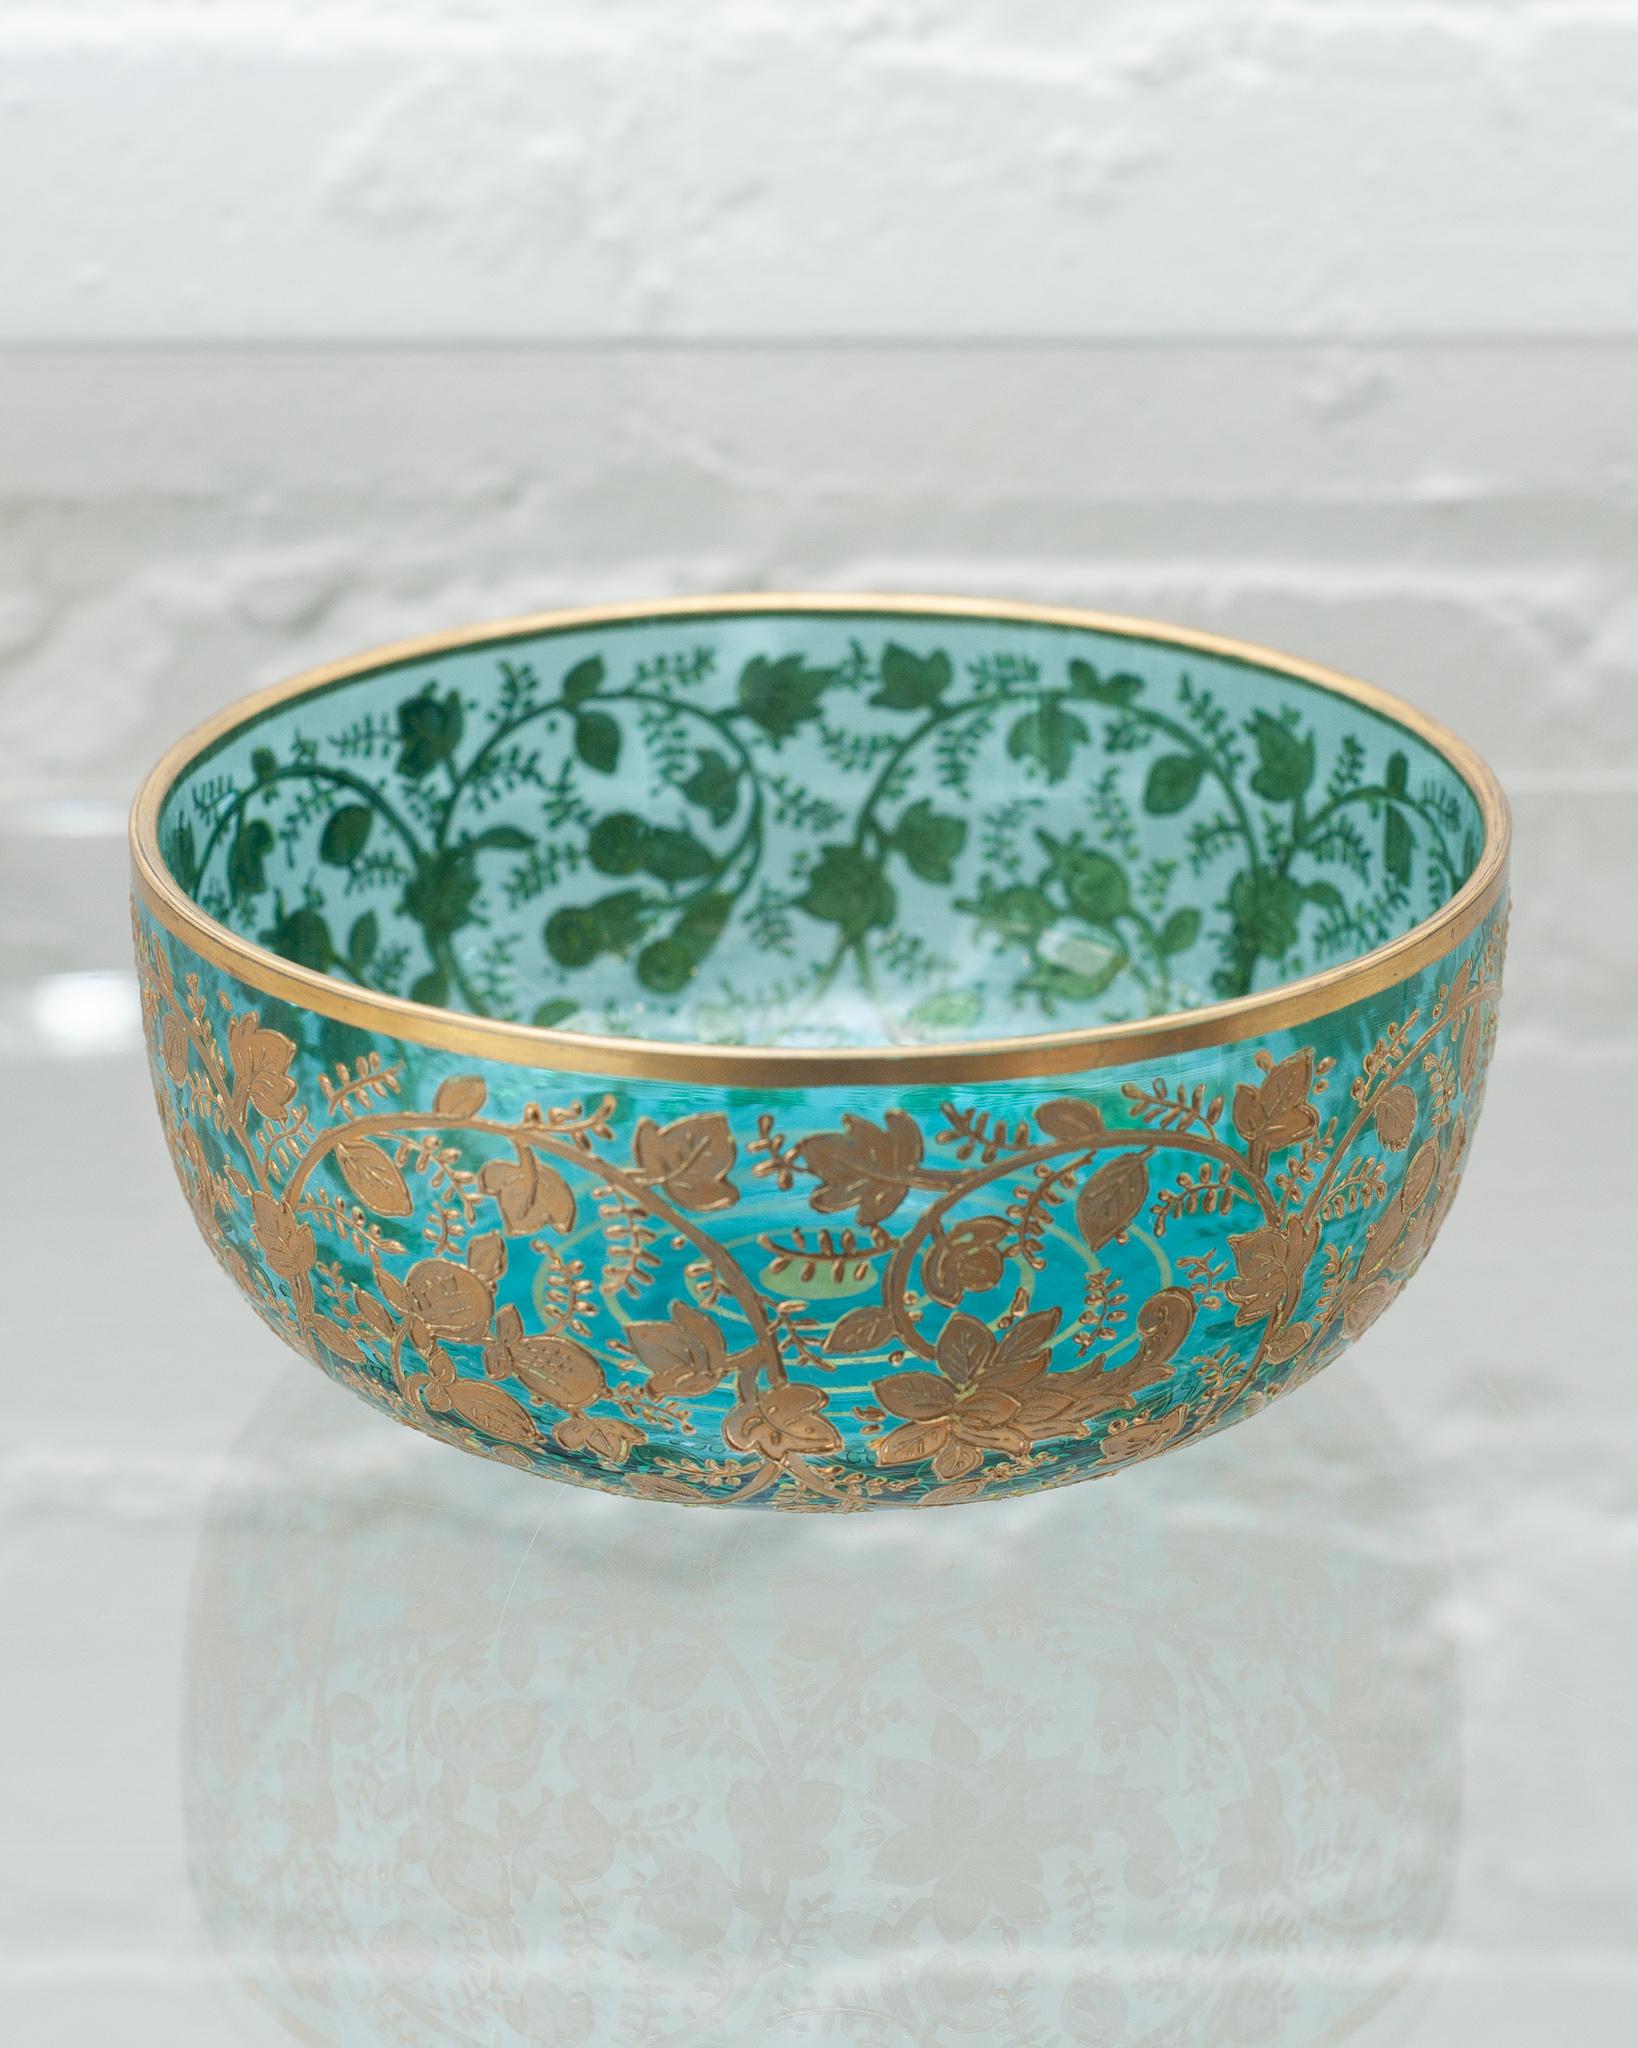 A stunning antique Moser turquoise crystal bowl with heavy floral gold gilding.